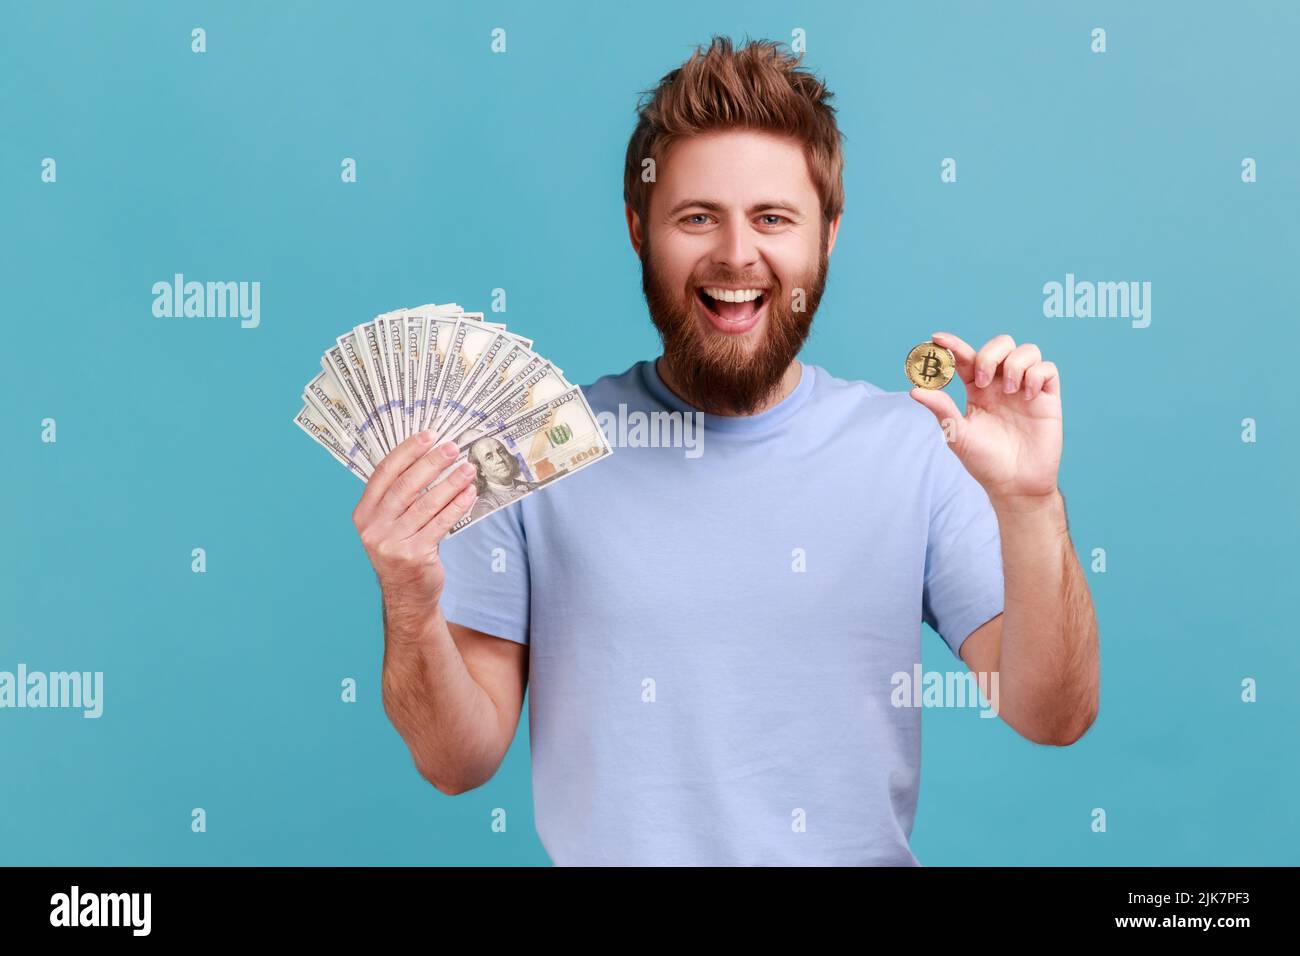 Portrait of positive optimnistic handsome bearded man showing dollar banknotes and bitcoin, digital money, electronic commerce, expressing excitement. Indoor studio shot isolated on blue background. Stock Photo